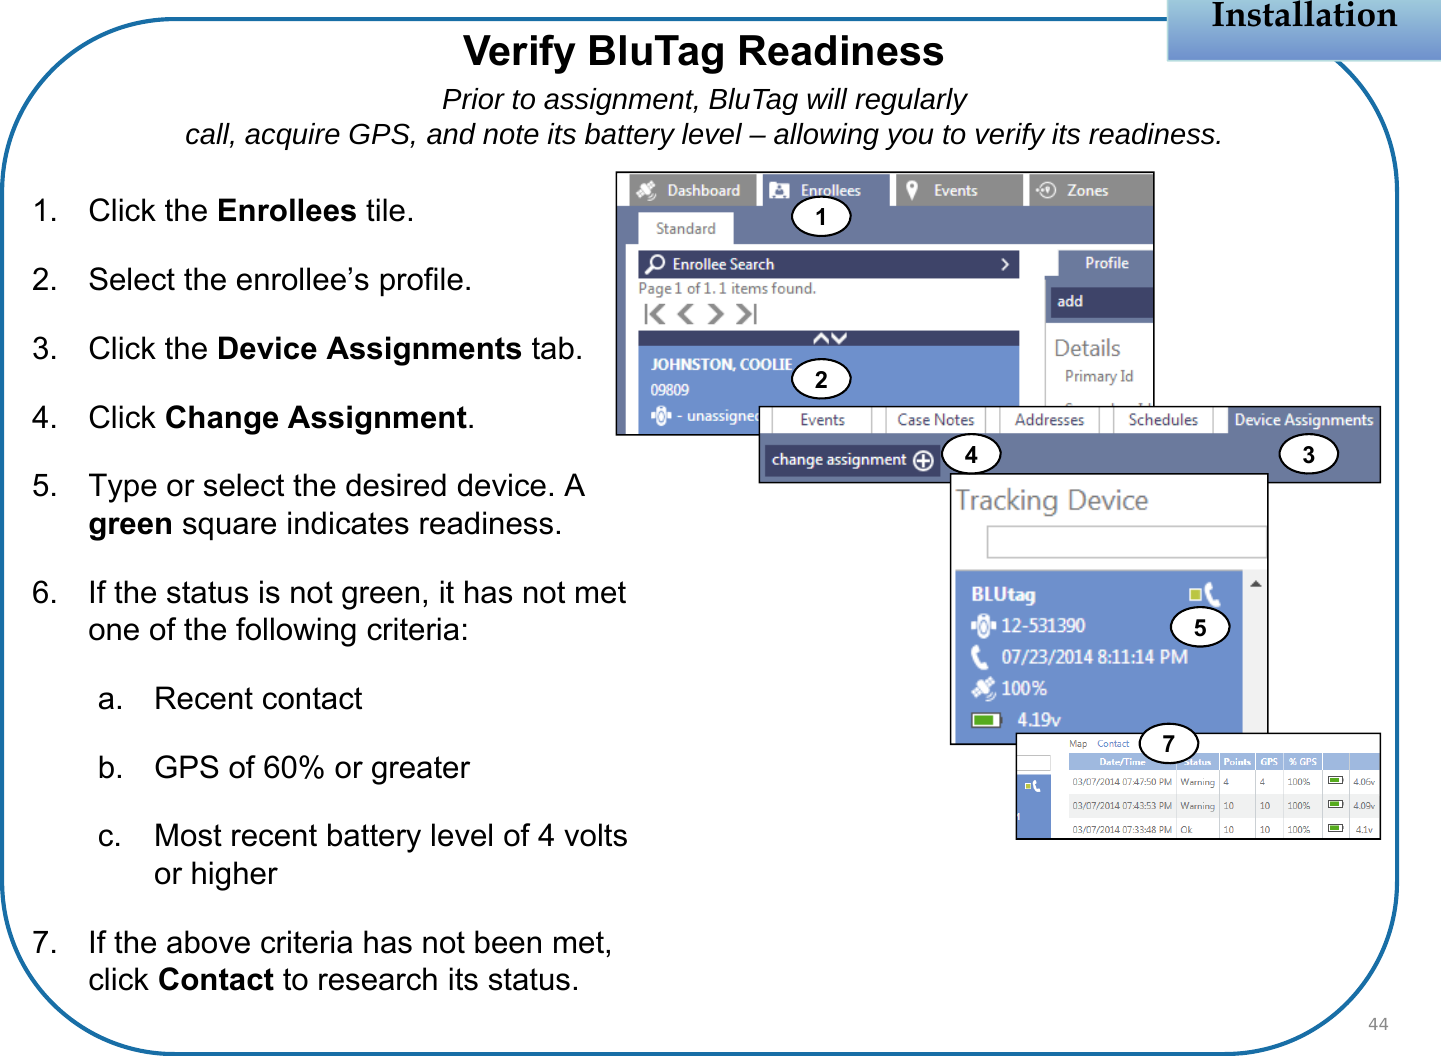 Verify BluTag ReadinessPrior to assignment, BluTag will regularlycall, acquire GPS, and note its battery level – allowing you to verify its readiness.Installation1. Click the Enrollees tile.2. Select the enrollee’s profile.3. Click the Device Assignments tab.4. Click Change Assignment.5. Type or select the desired device. A green square indicates readiness.6. If the status is not green, it has not met one of the following criteria:a. Recent contactb. GPS of 60% or greaterc. Most recent battery level of 4 volts or higher7. If the above criteria has not been met, click Contact to research its status.44124537